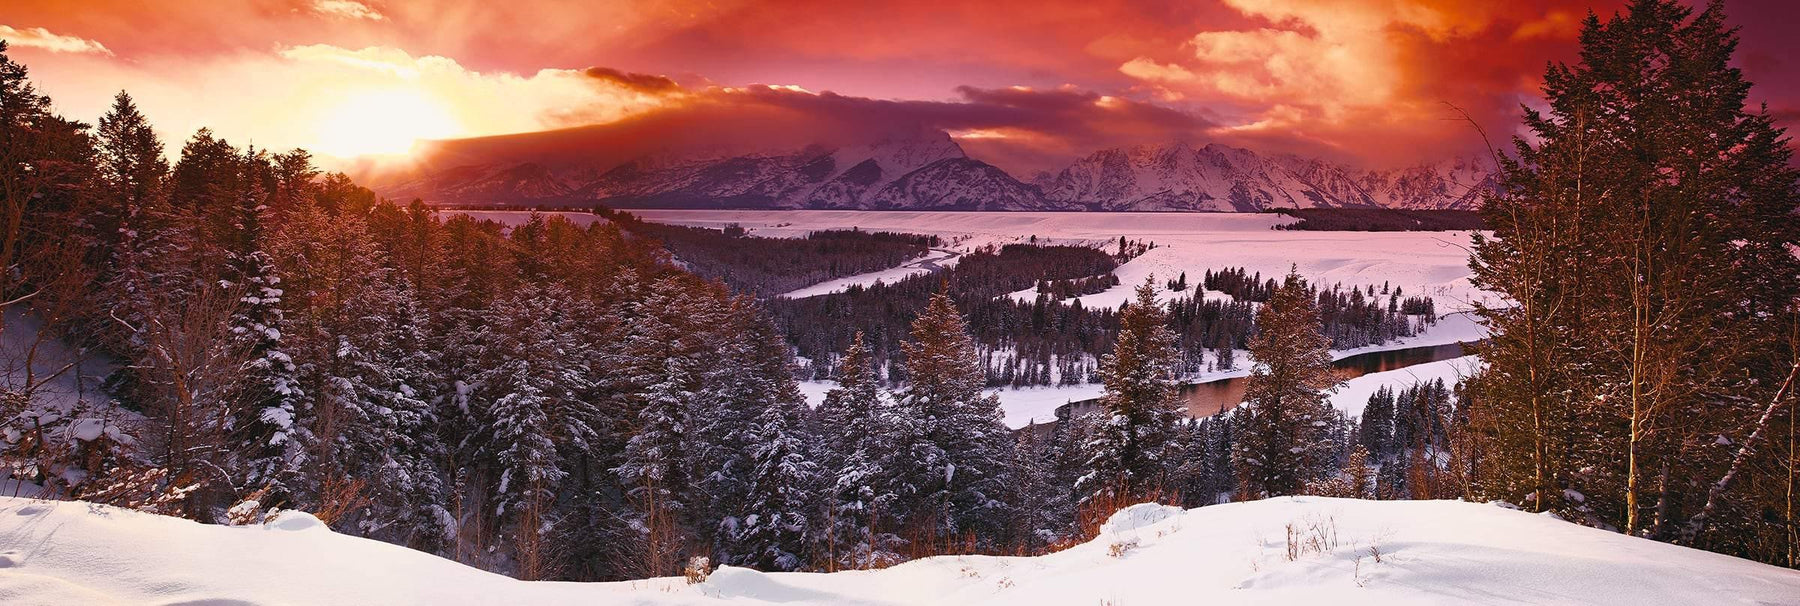 Sun shining through the clouds as it sets on the snow covered valley and forest of Grand Tetons National Park Wyoming